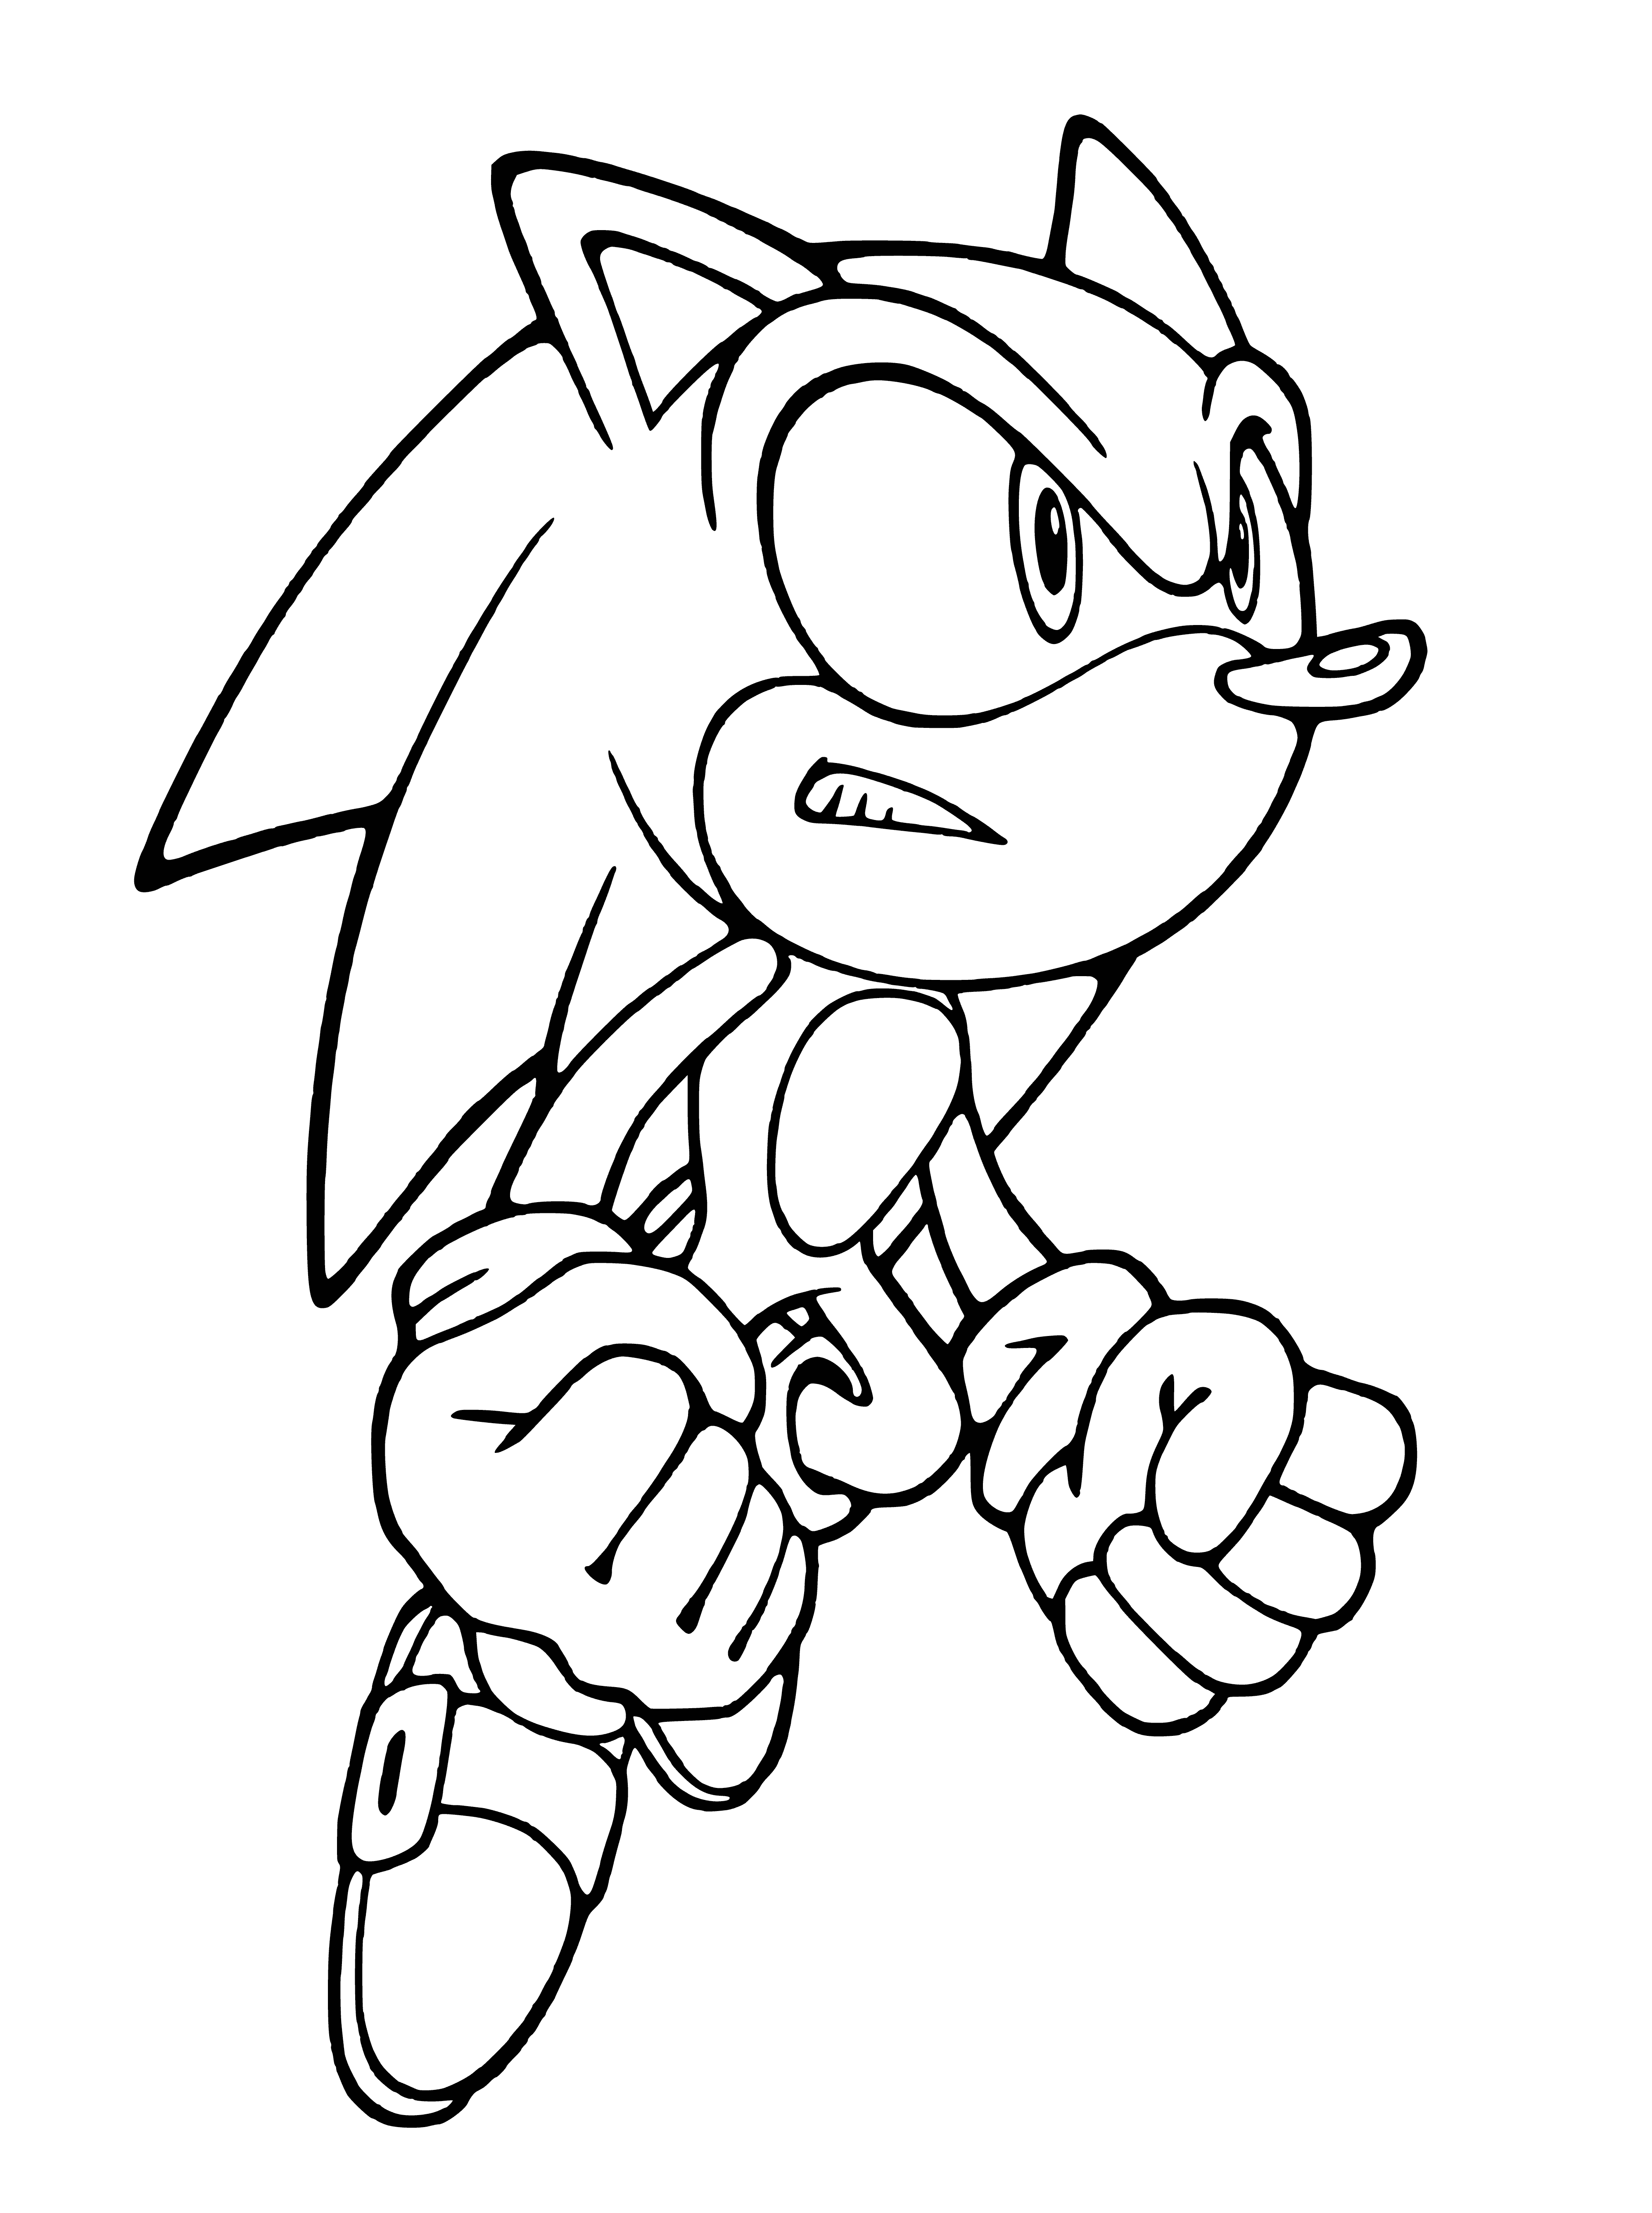 coloring page: Sonic stands strong, facing a determined challenge. Behind him lies a bustling metropolis. #SonicX #SonicTheHedgehog